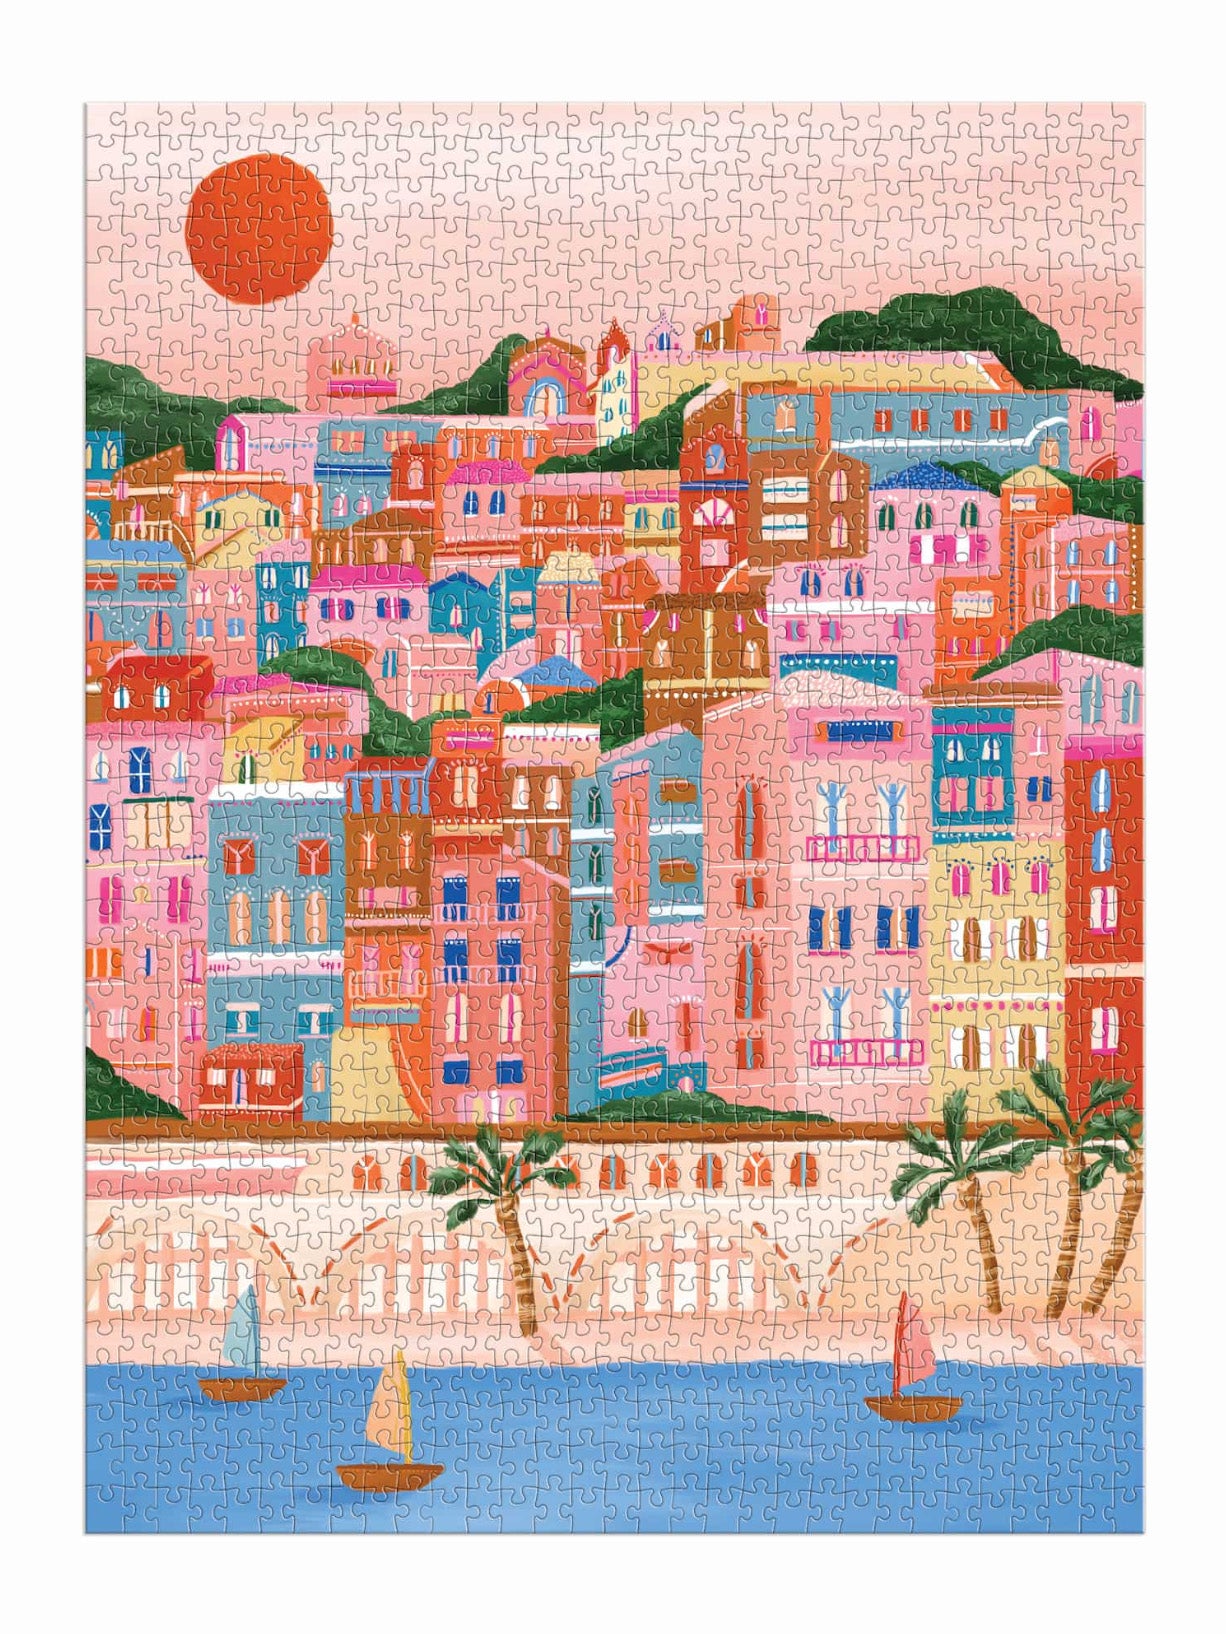 colors of the french riviera 1000 piece puzzle